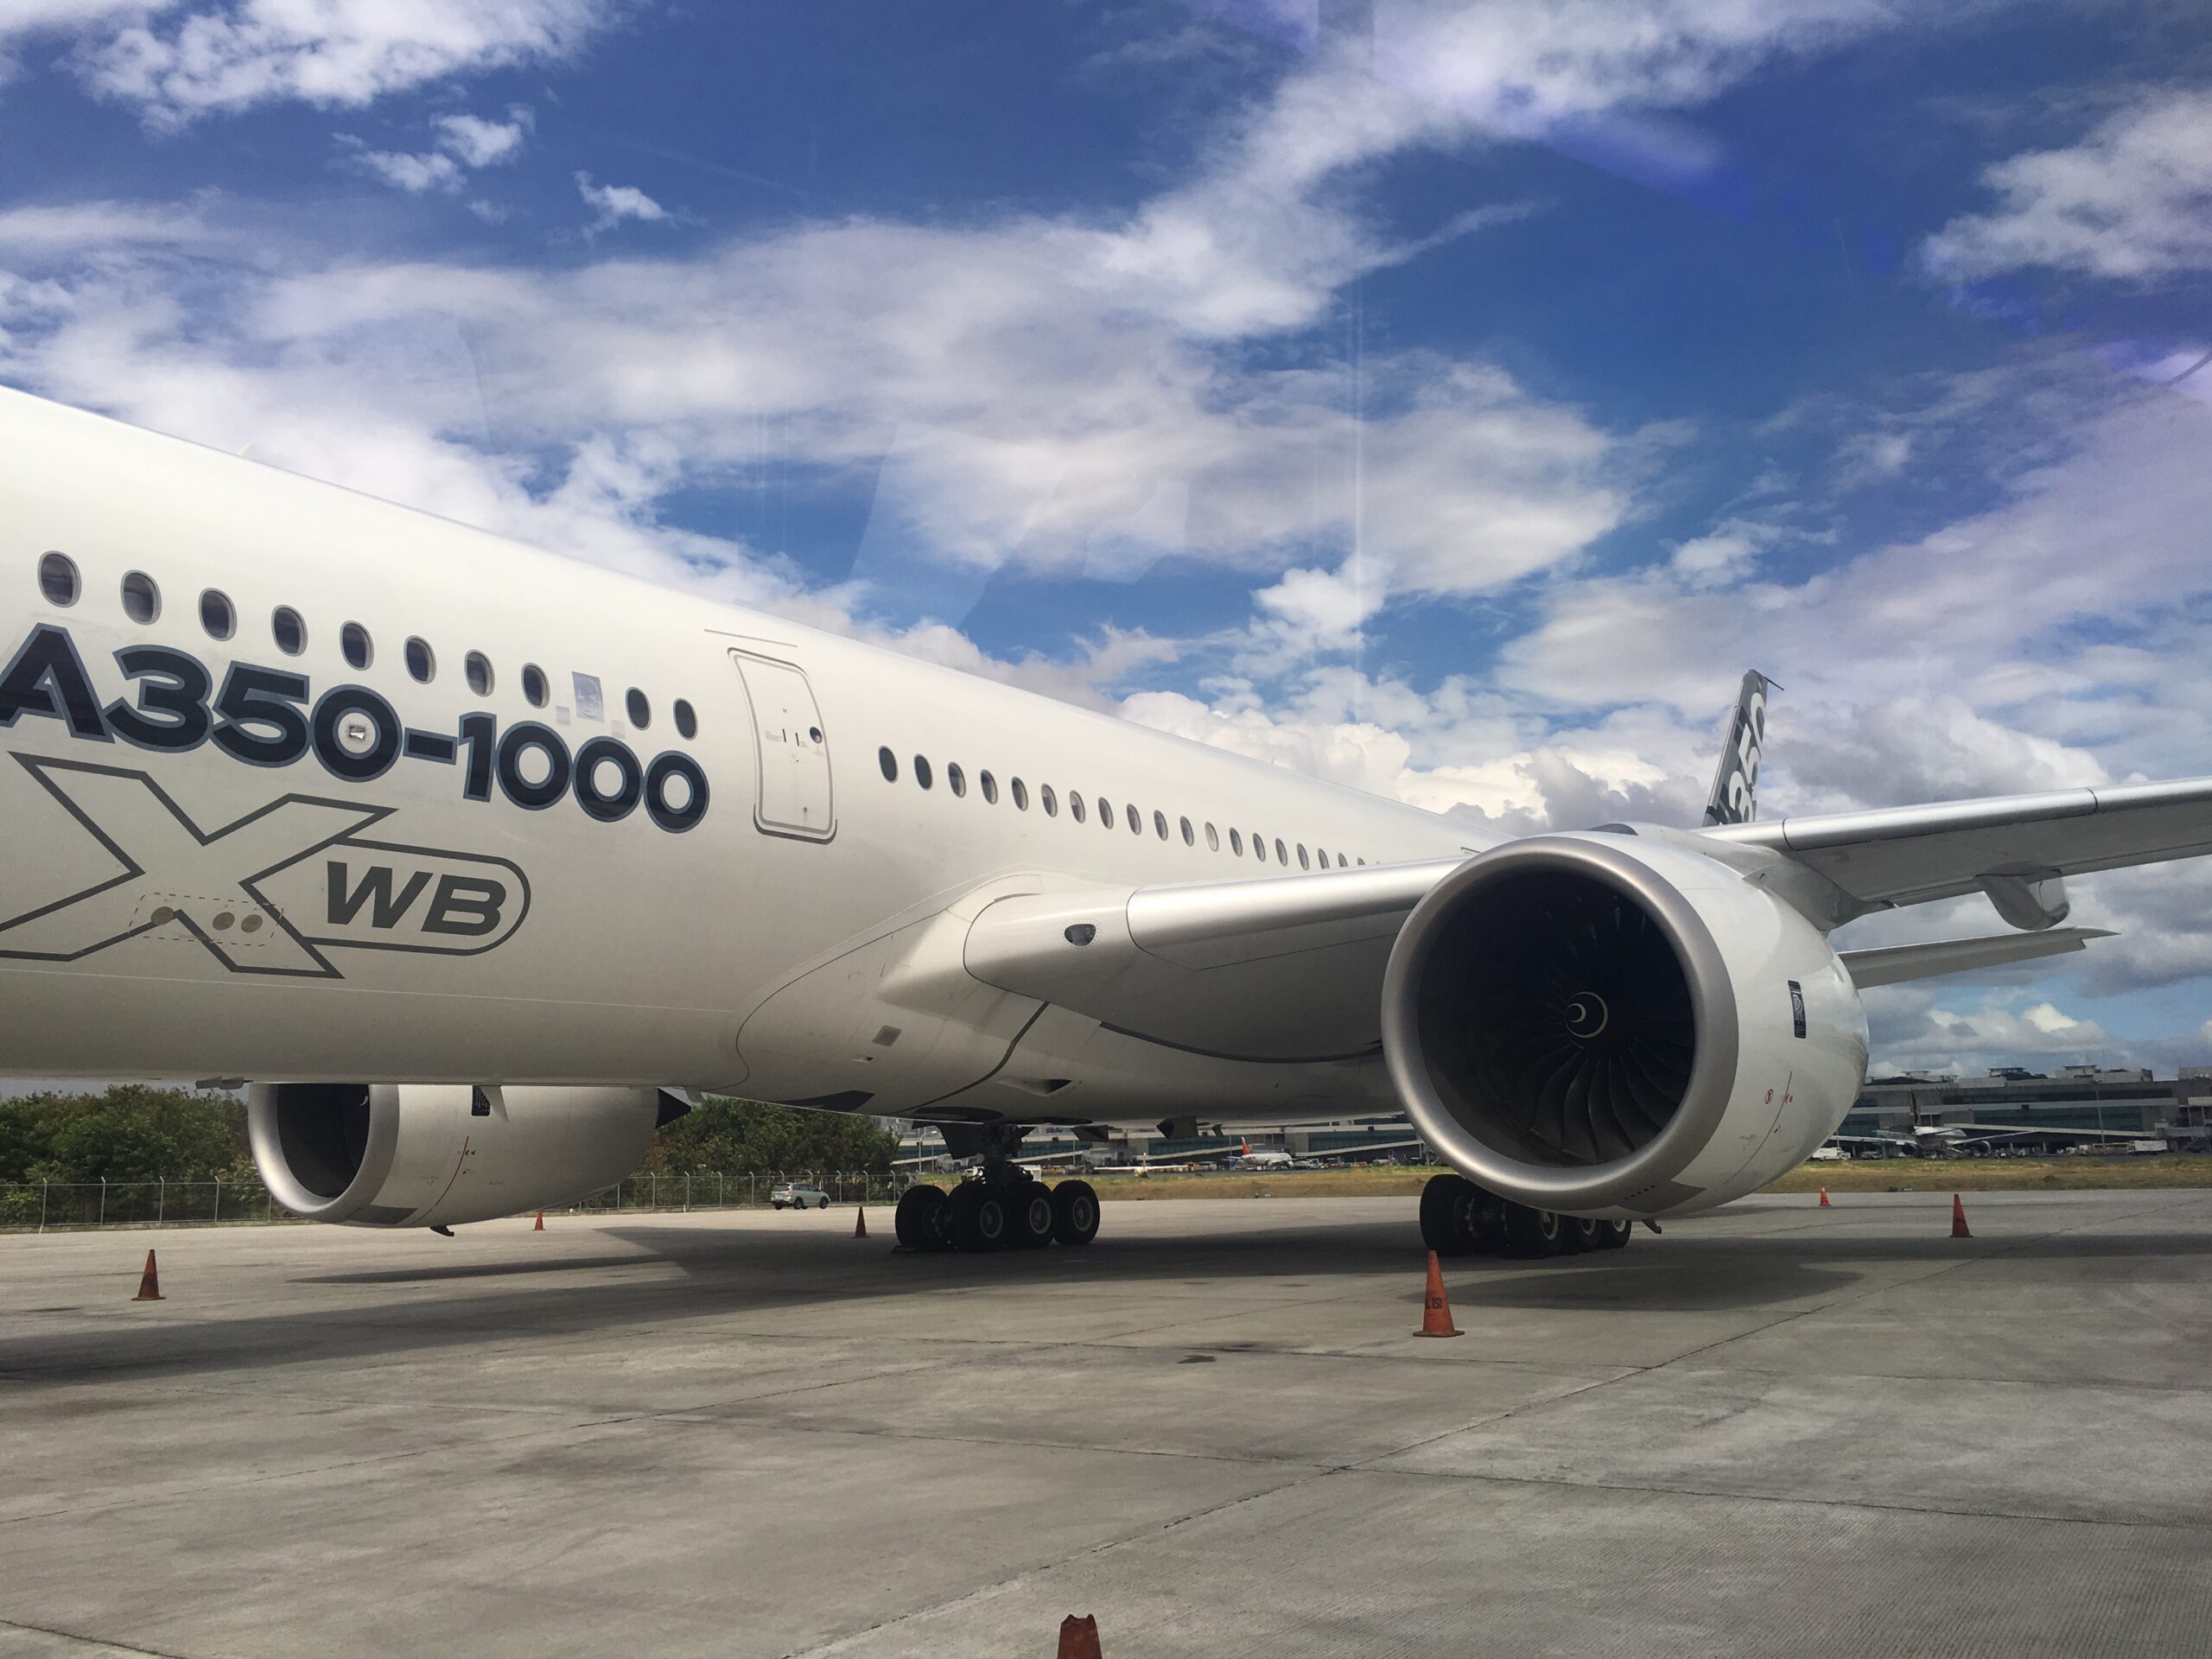 PAL eyes Airbus A350-1000 as plane marks 1st touchdown in Manila